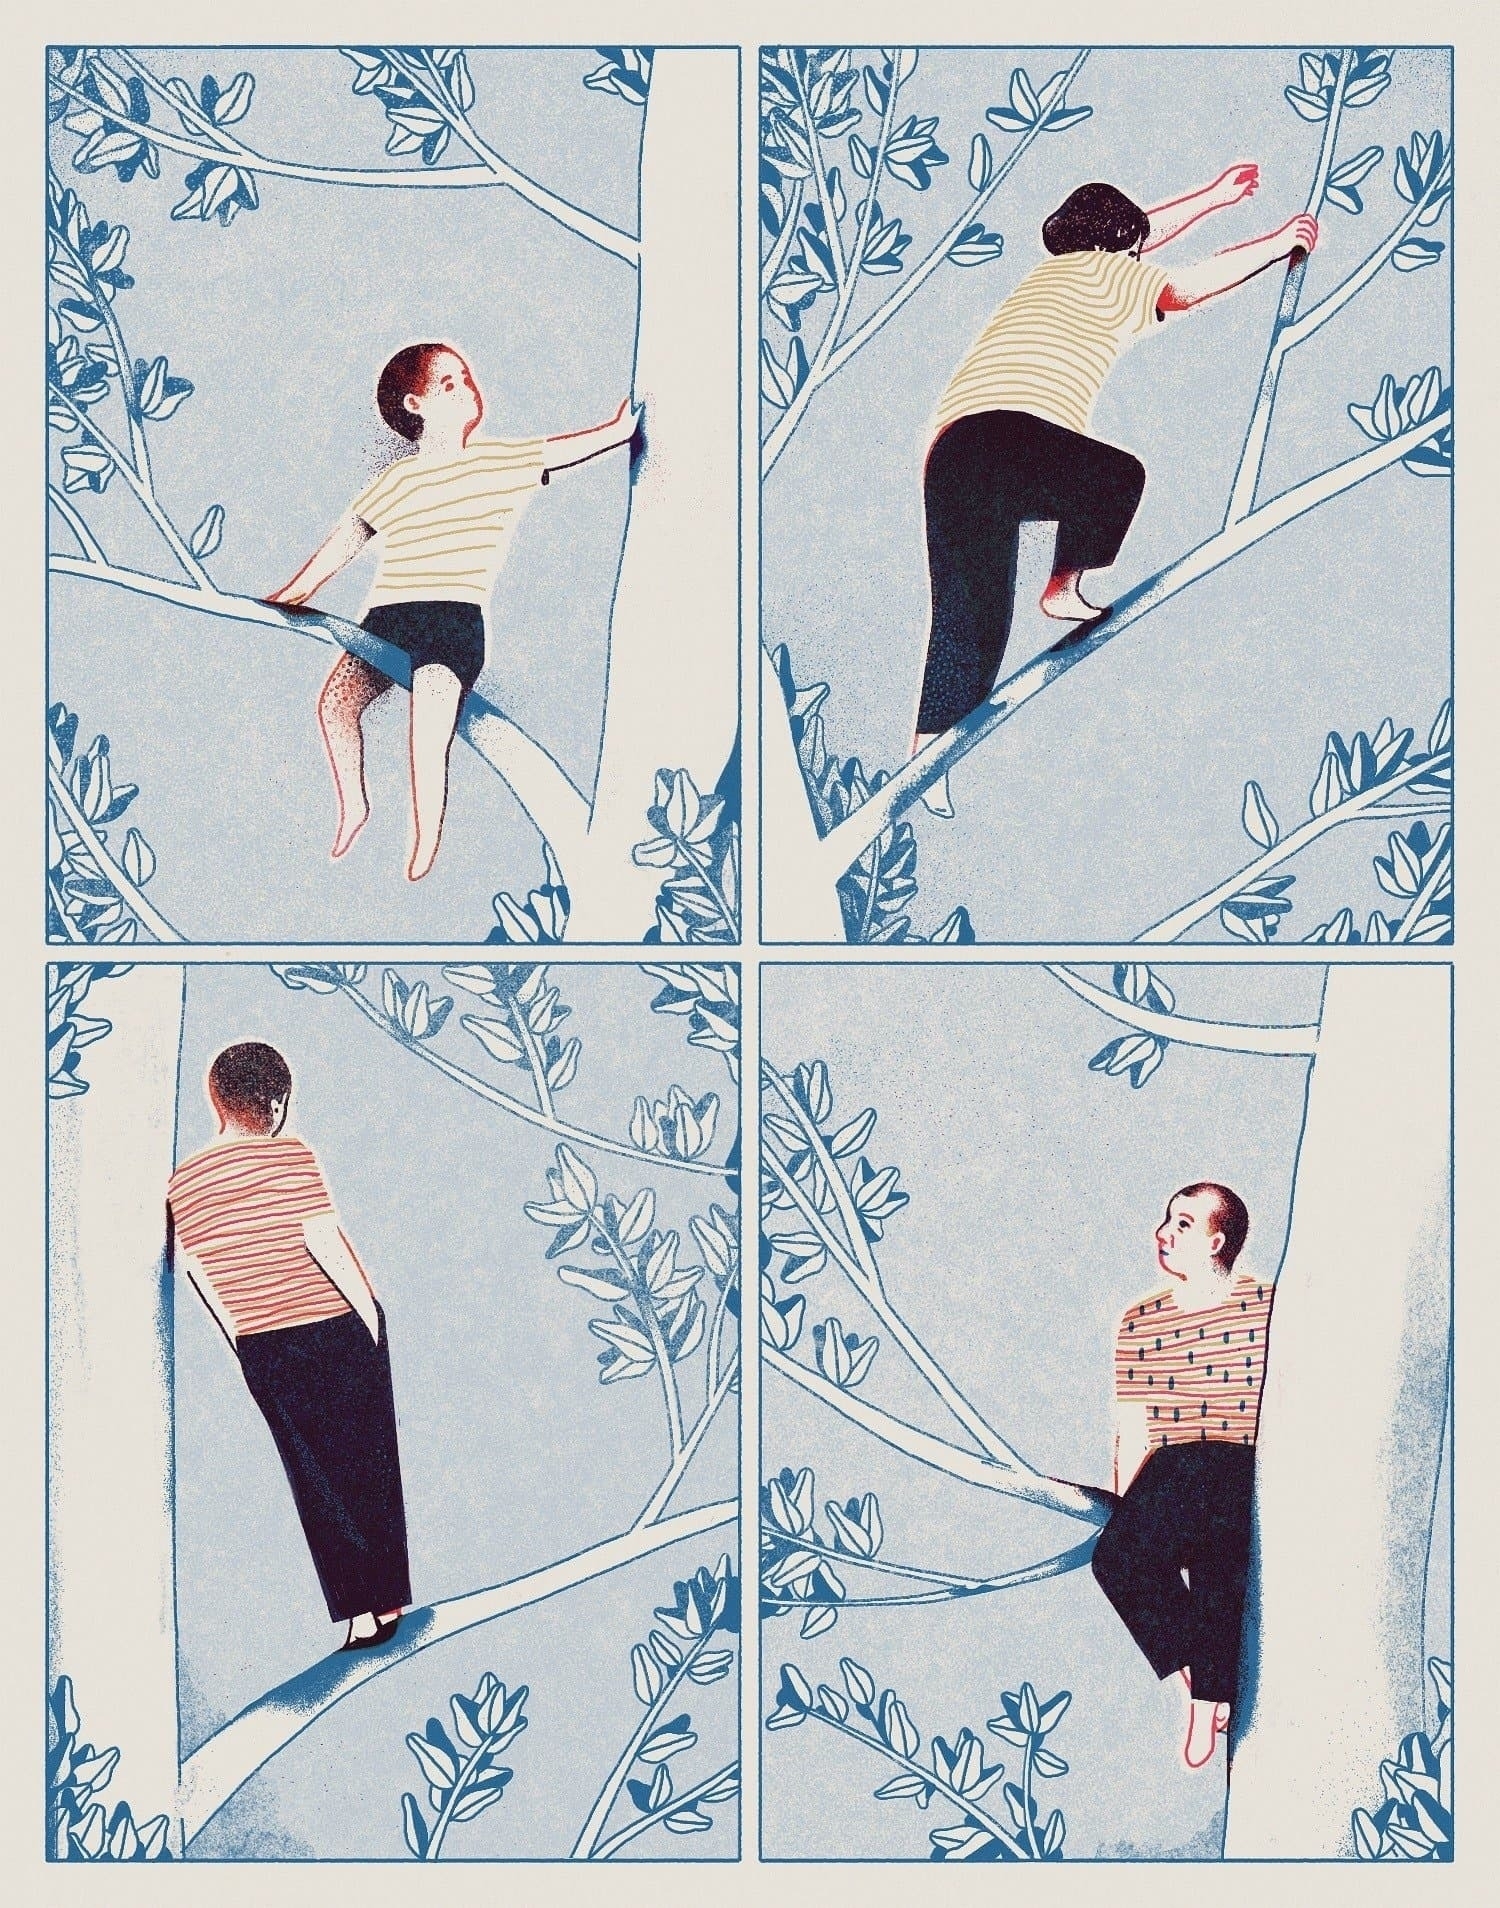 Four-panel illustration showing different life stages on a tree: a child sitting, a teenager climbing, an adult leaning, and an older person sitting.